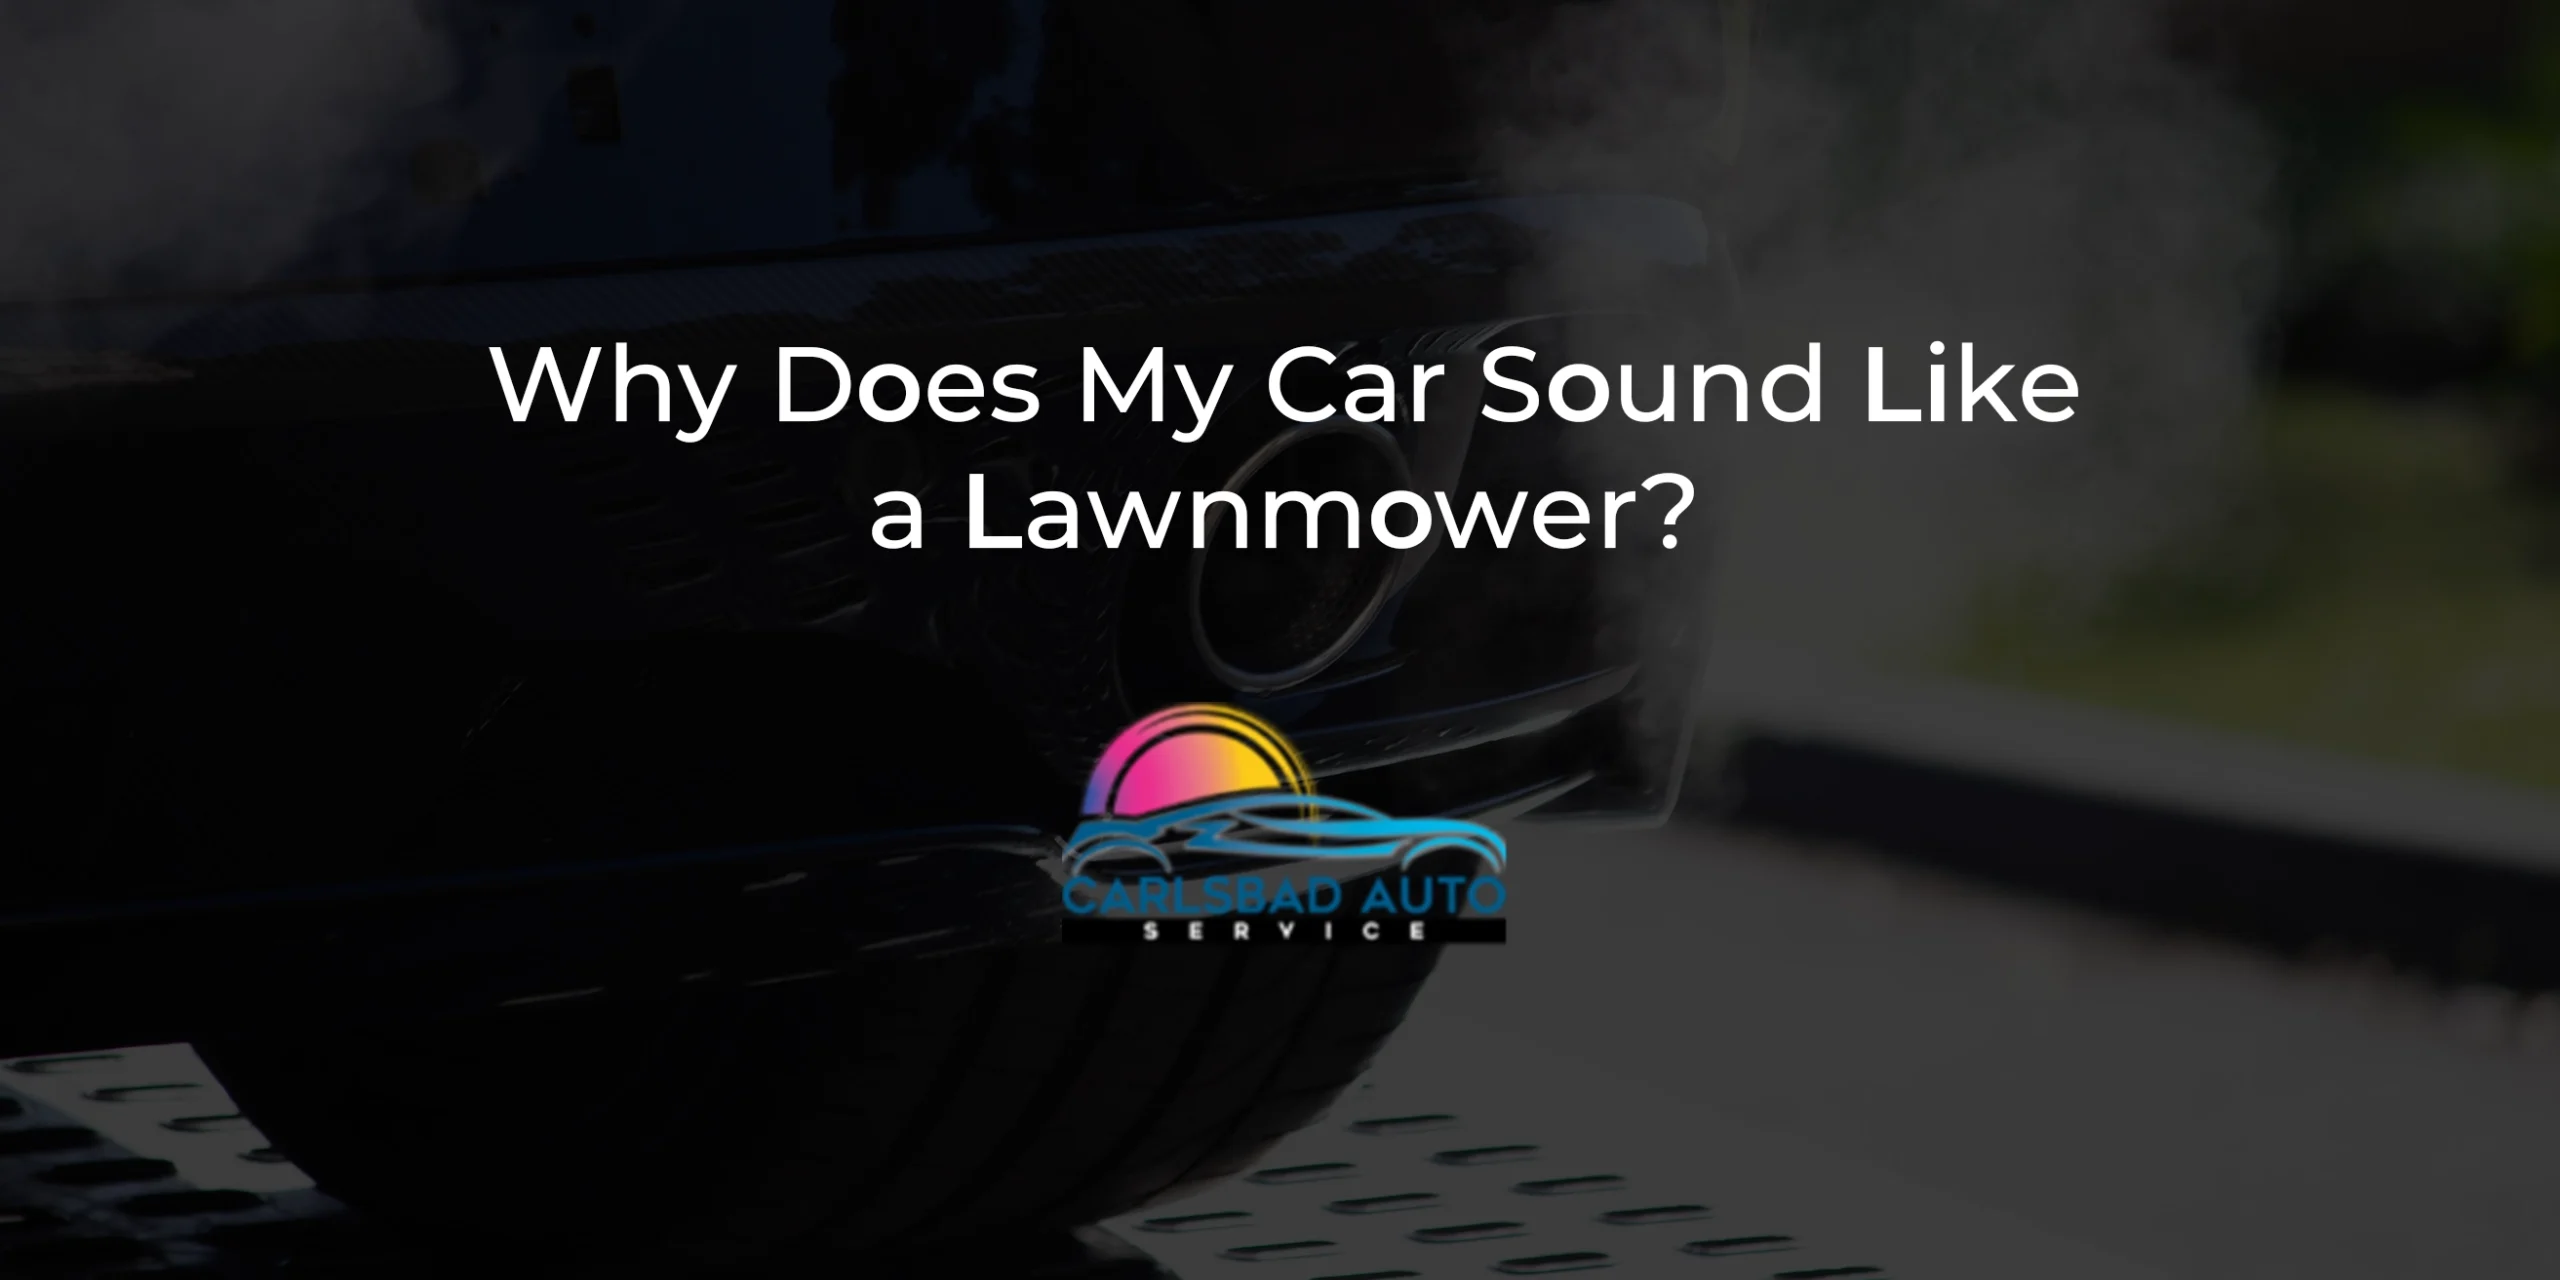 Why Does My Car Sound Like a Lawnmower?